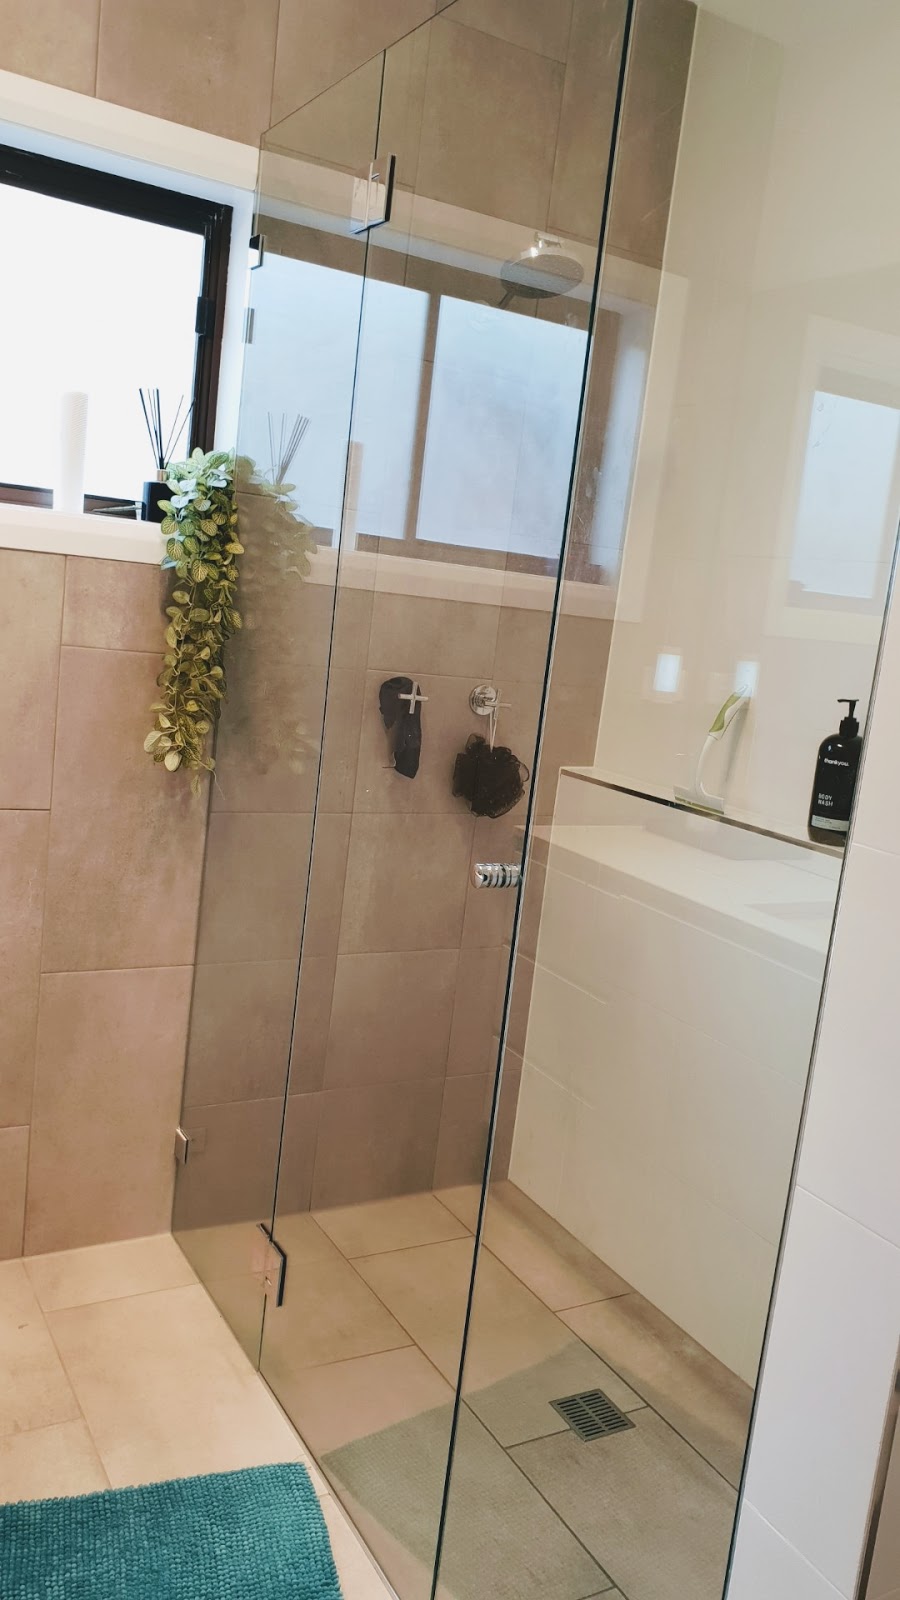 Frameless glass showers & pool fencing | Ilford Ave, Buttaba NSW 2283, Australia | Phone: 0414 532 616